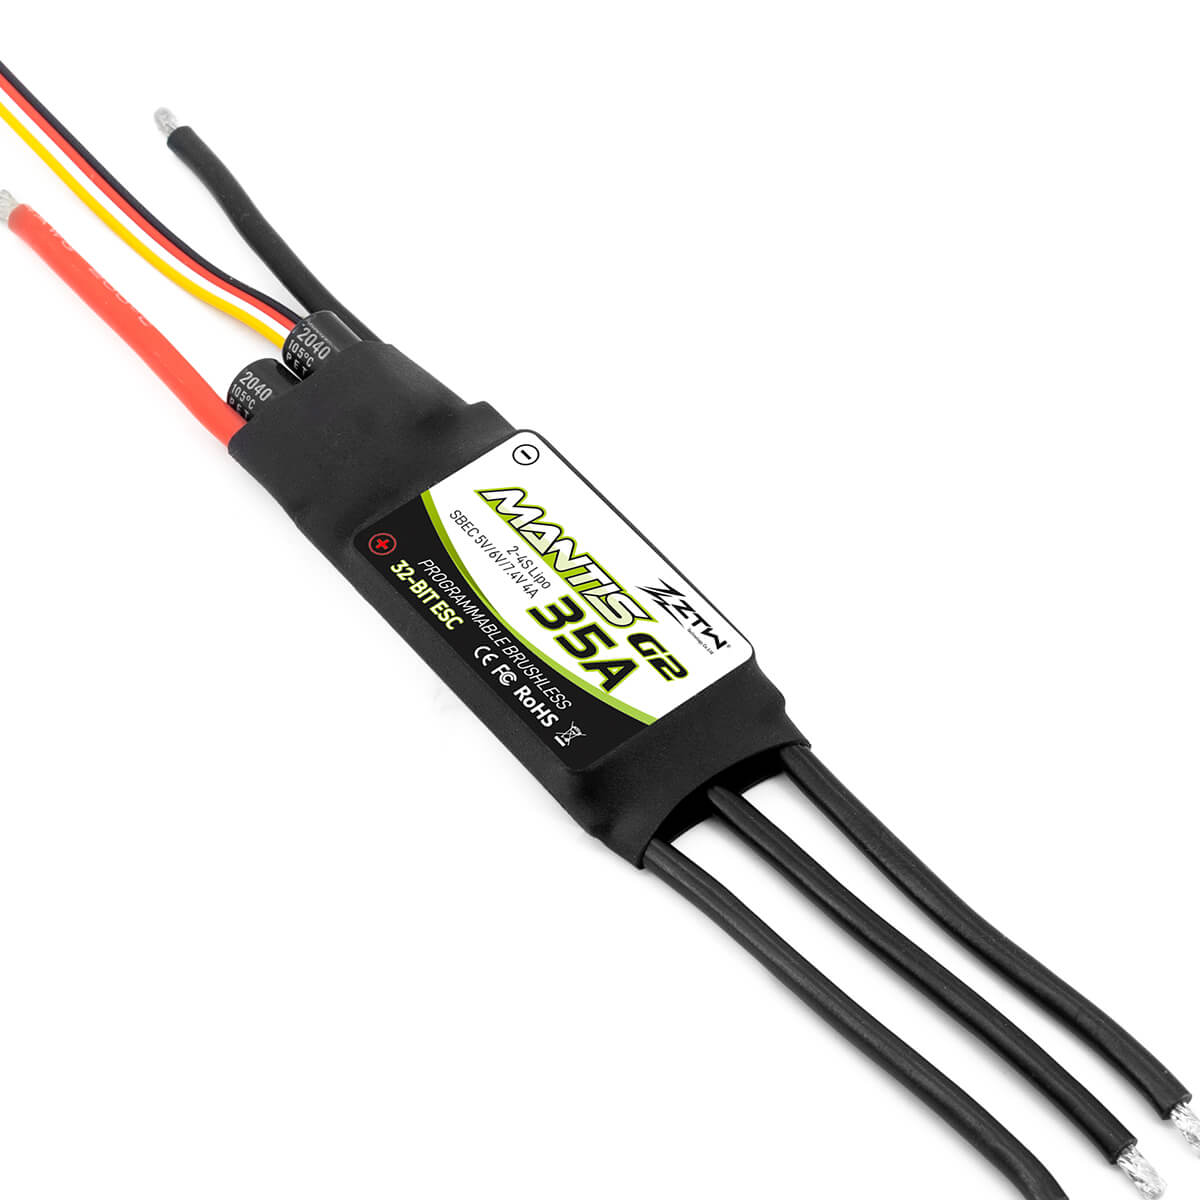 ZTW Mantis 35A SBEC G2 Series ESC for Airplanes